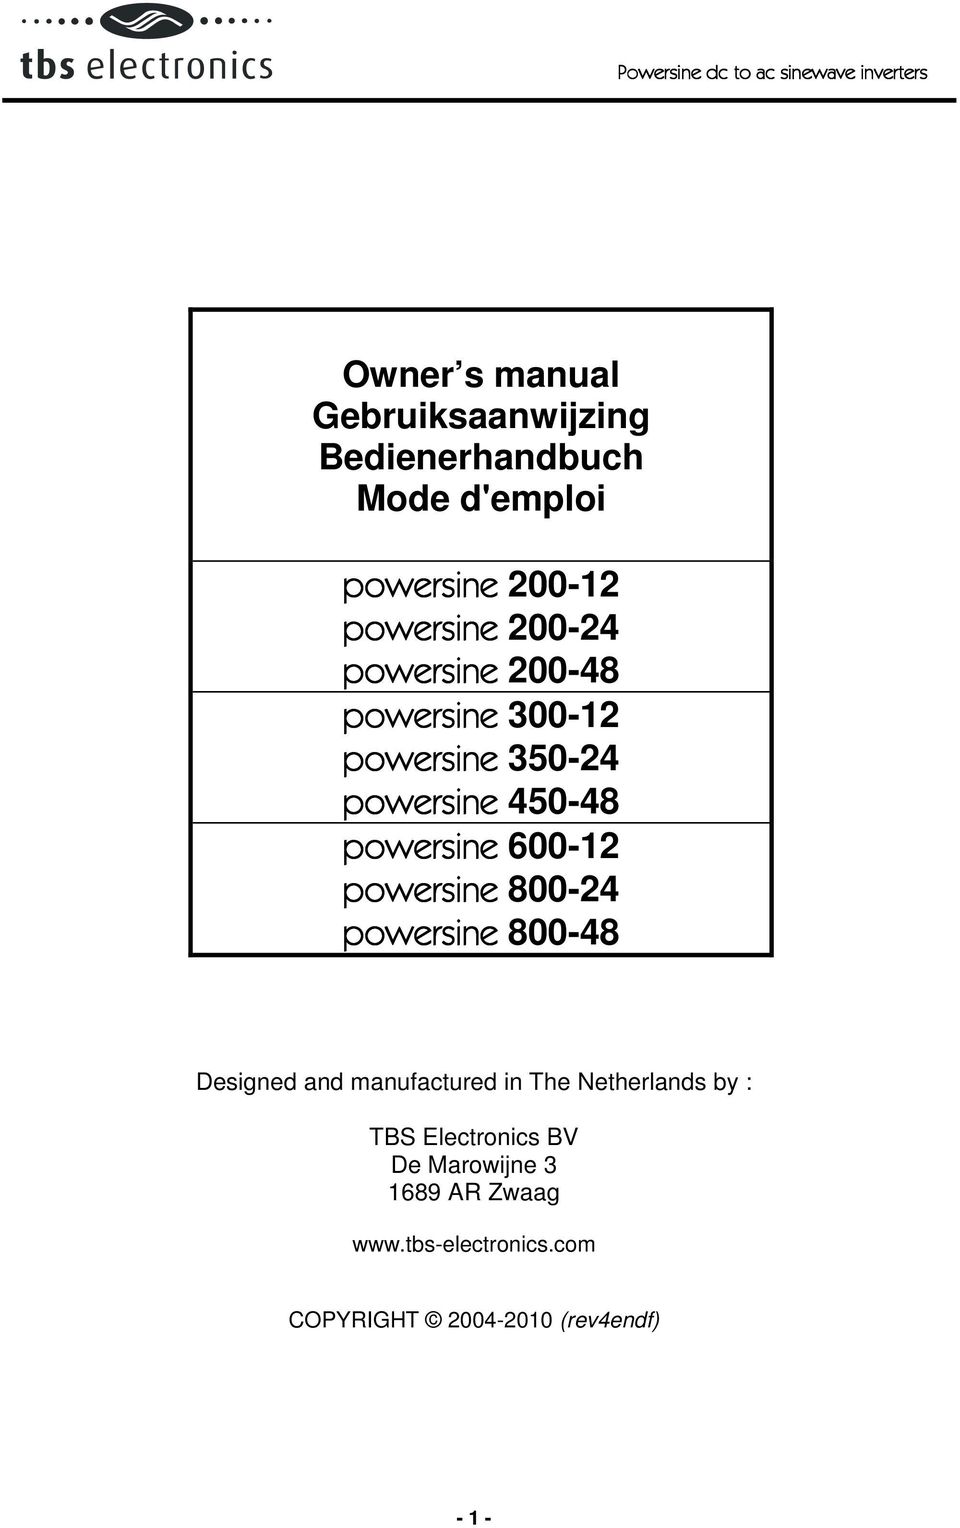 powersine 800-24 powersine 800-48 Designed and manufactured in The Netherlands by : TBS